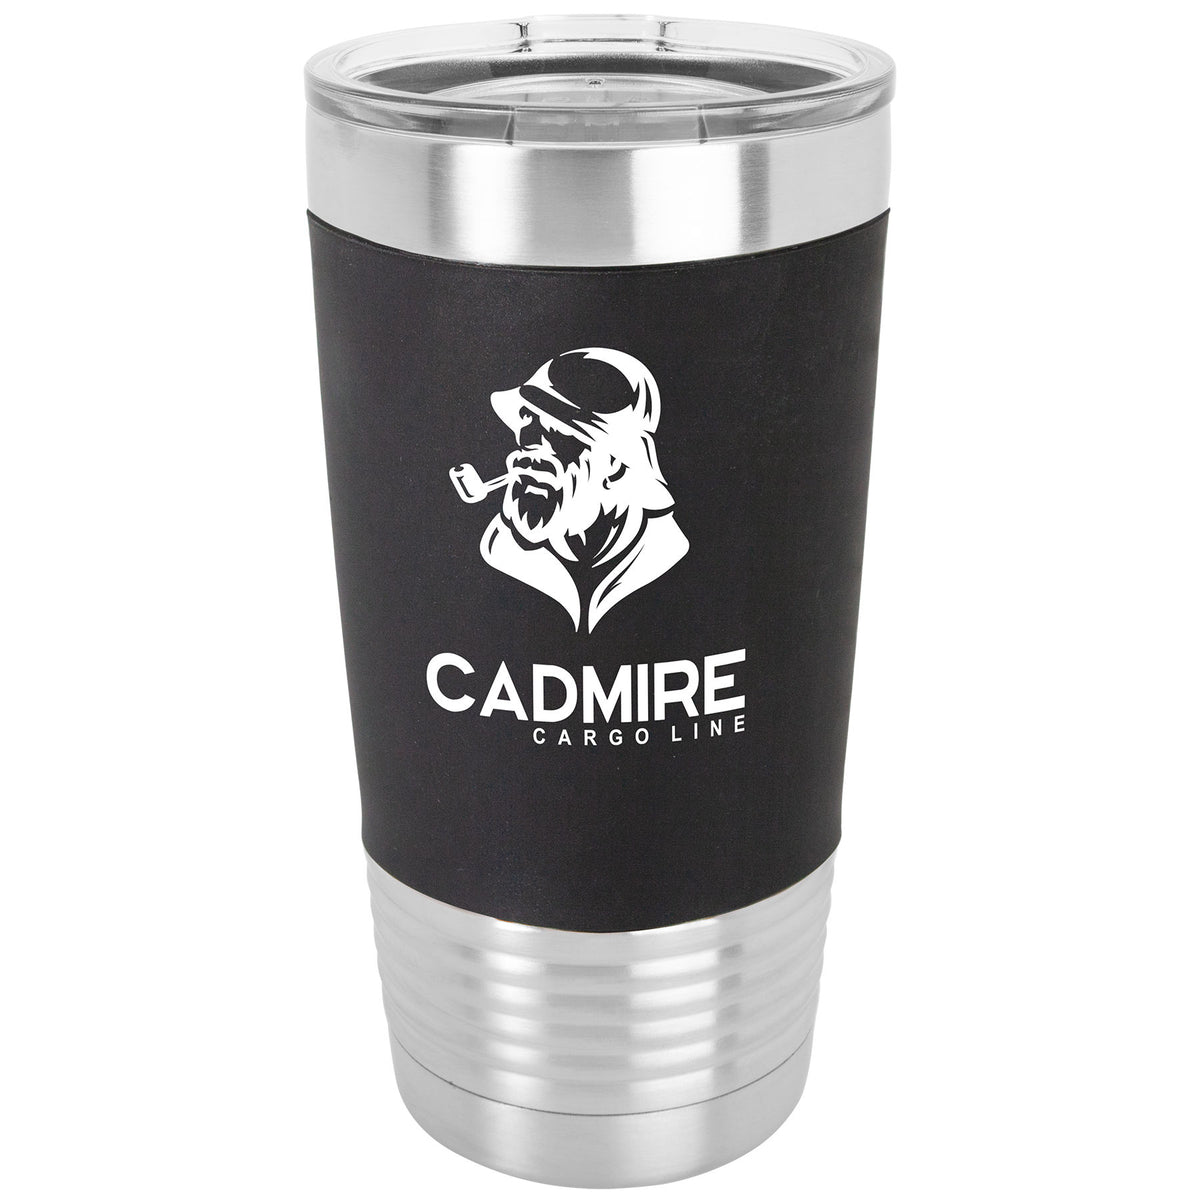 Date Polar Camel Stainless Steel Tumbler Powder Coated Finish 20Oz Tumbler Insulated Coffee Mug Title Spill Proof Clear Acrylic Lid Tuxedo Personalized Tumbler with Name